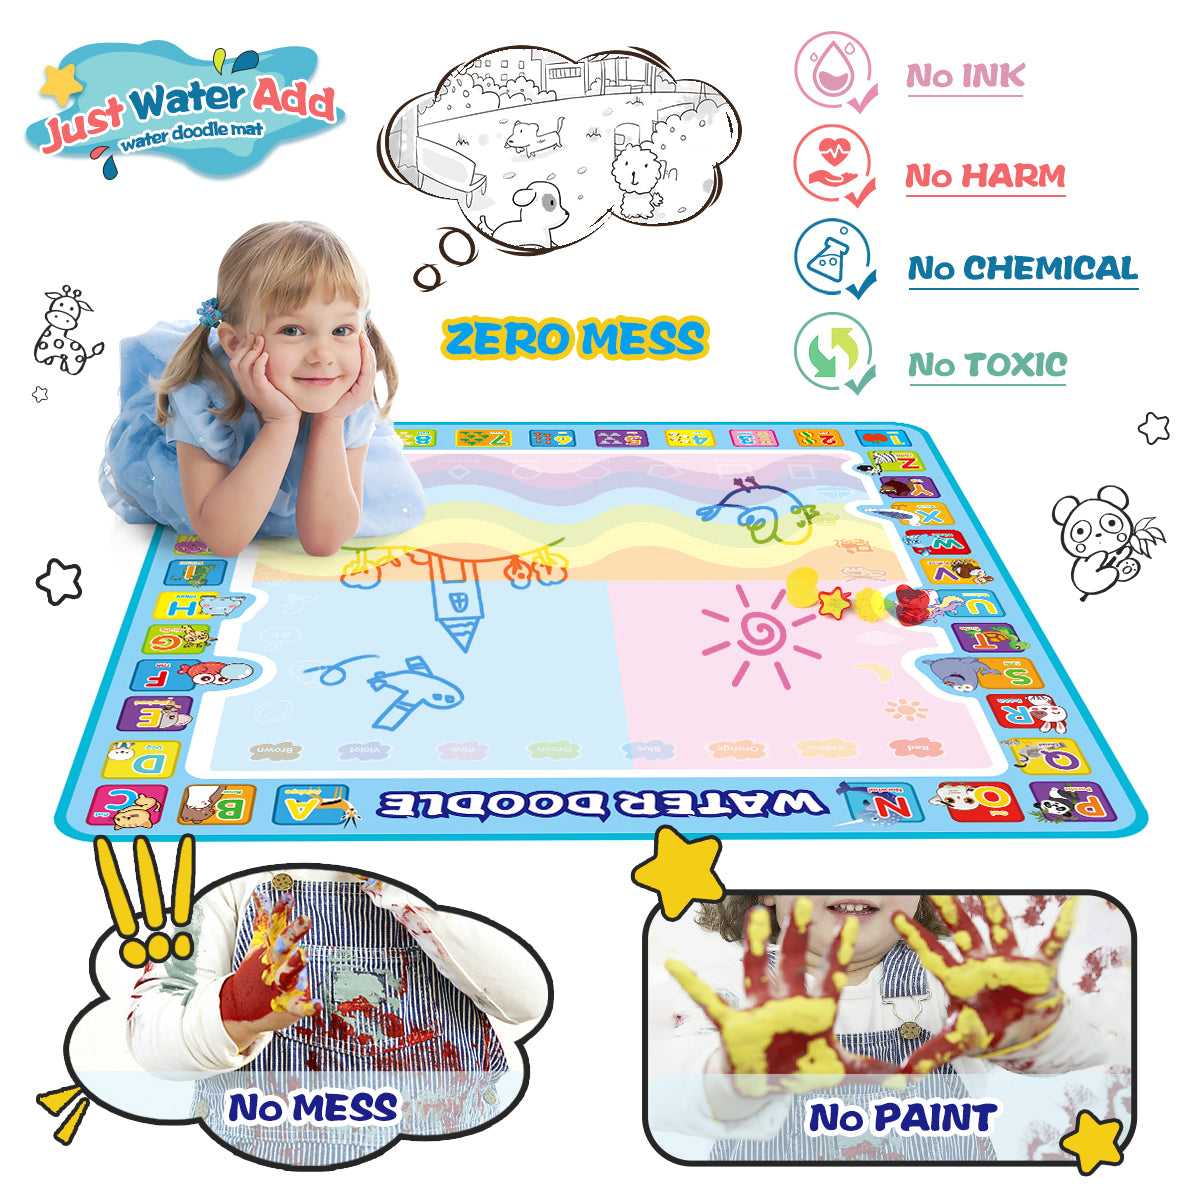 Joyfia Water Doodle Mat, 100 x 100 cm Large Water Drawing Doodling Mat, Mess-Free Coloring Painting Mat, Educational Toys Birthday Gifts for Kids Toddlers Boys Girls Age 3-8 Year Old